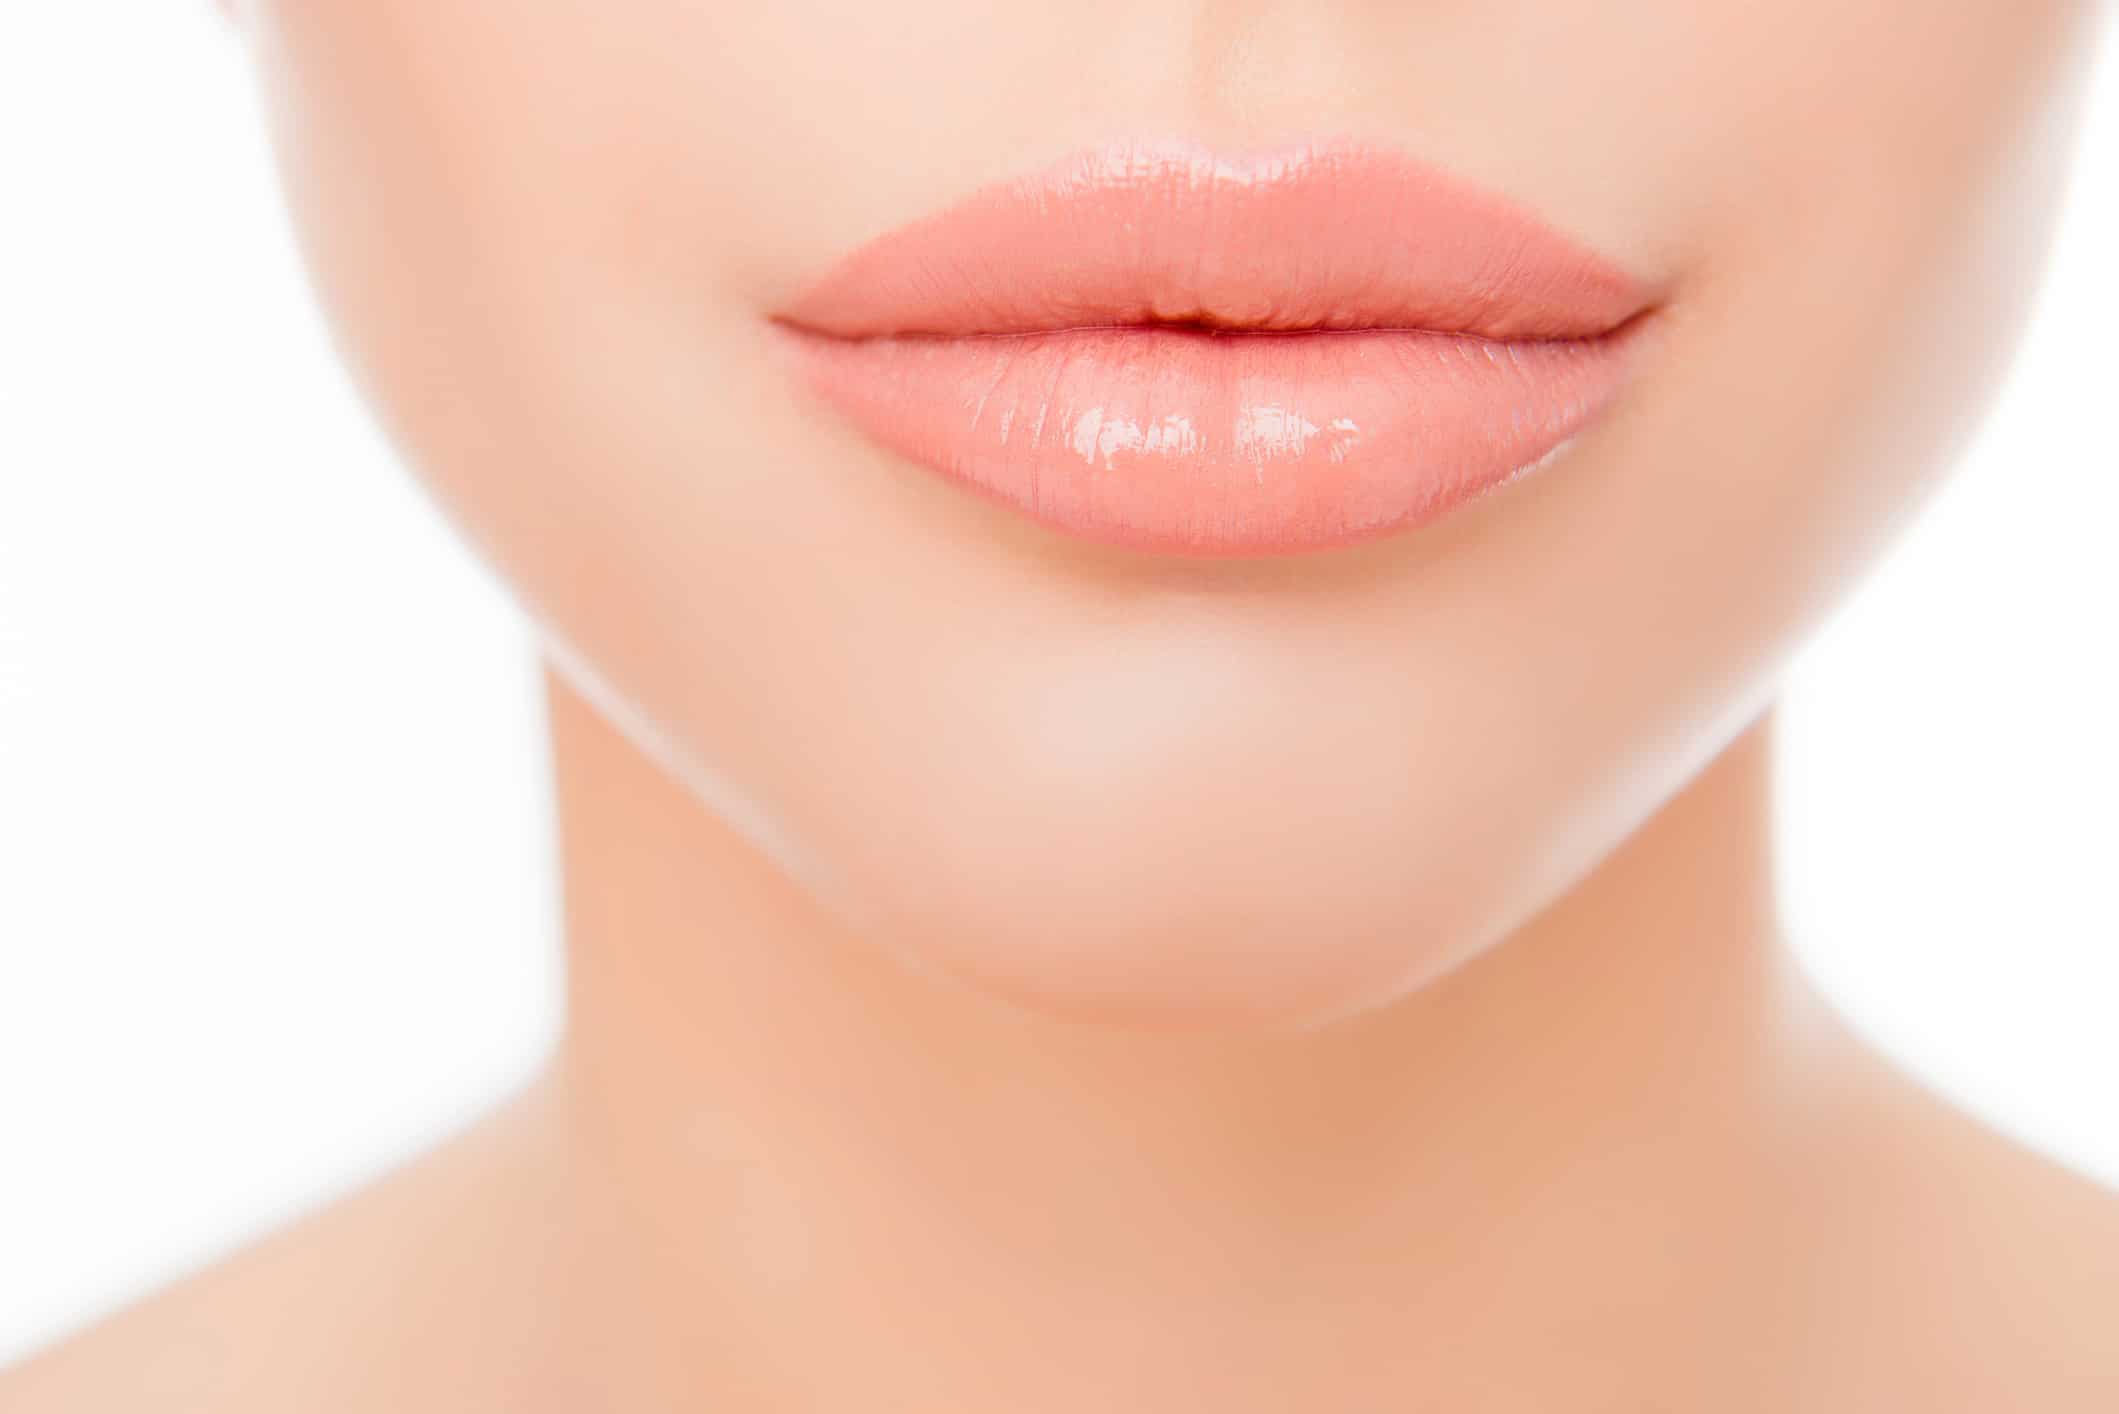 Close up photo of full woman's lips after augmentation